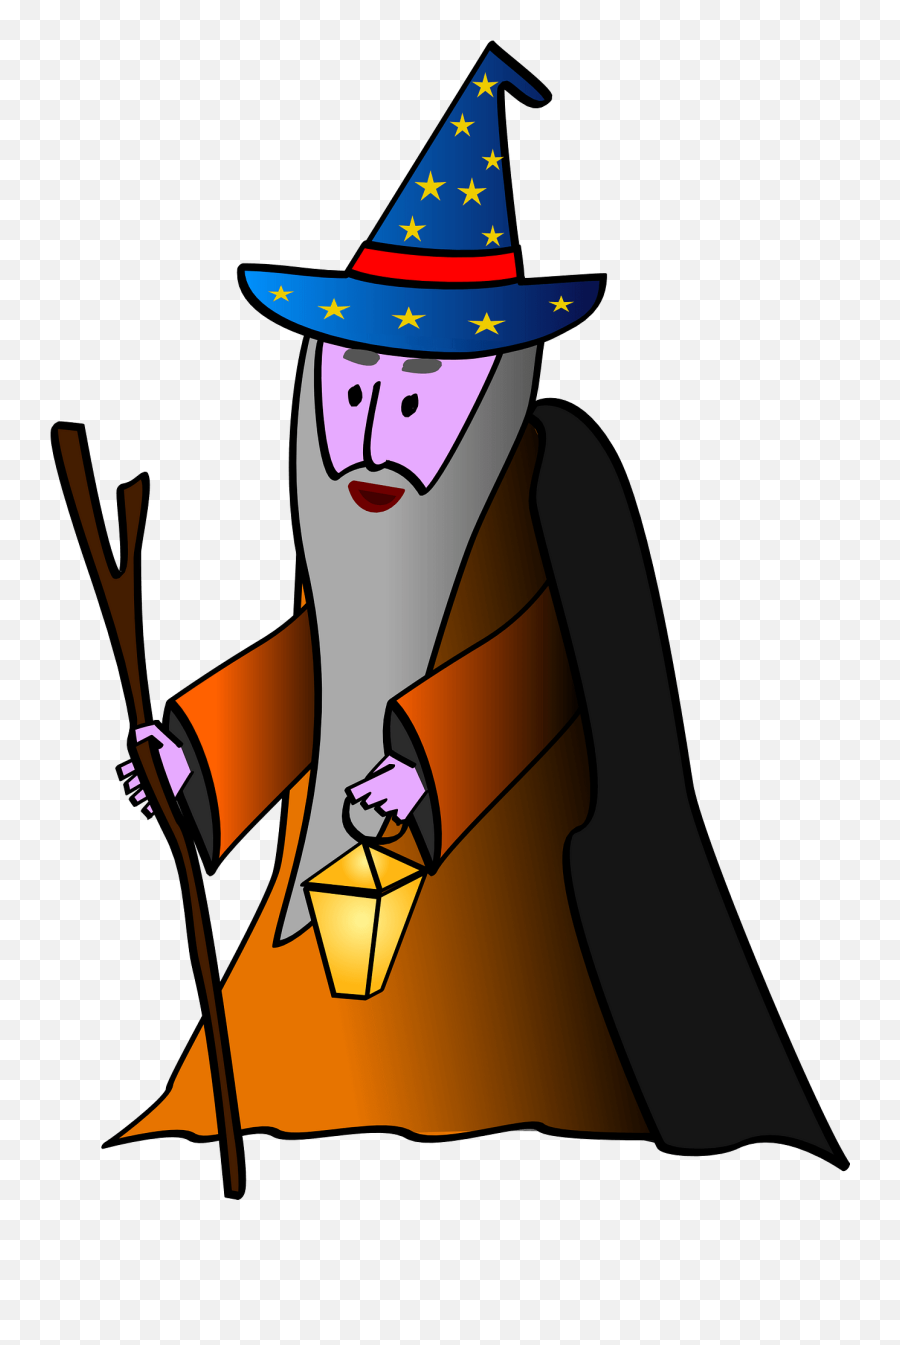 Old Wizard With A Cane And Lantern - Clip Art Emoji,Old Man With Cane Emoji